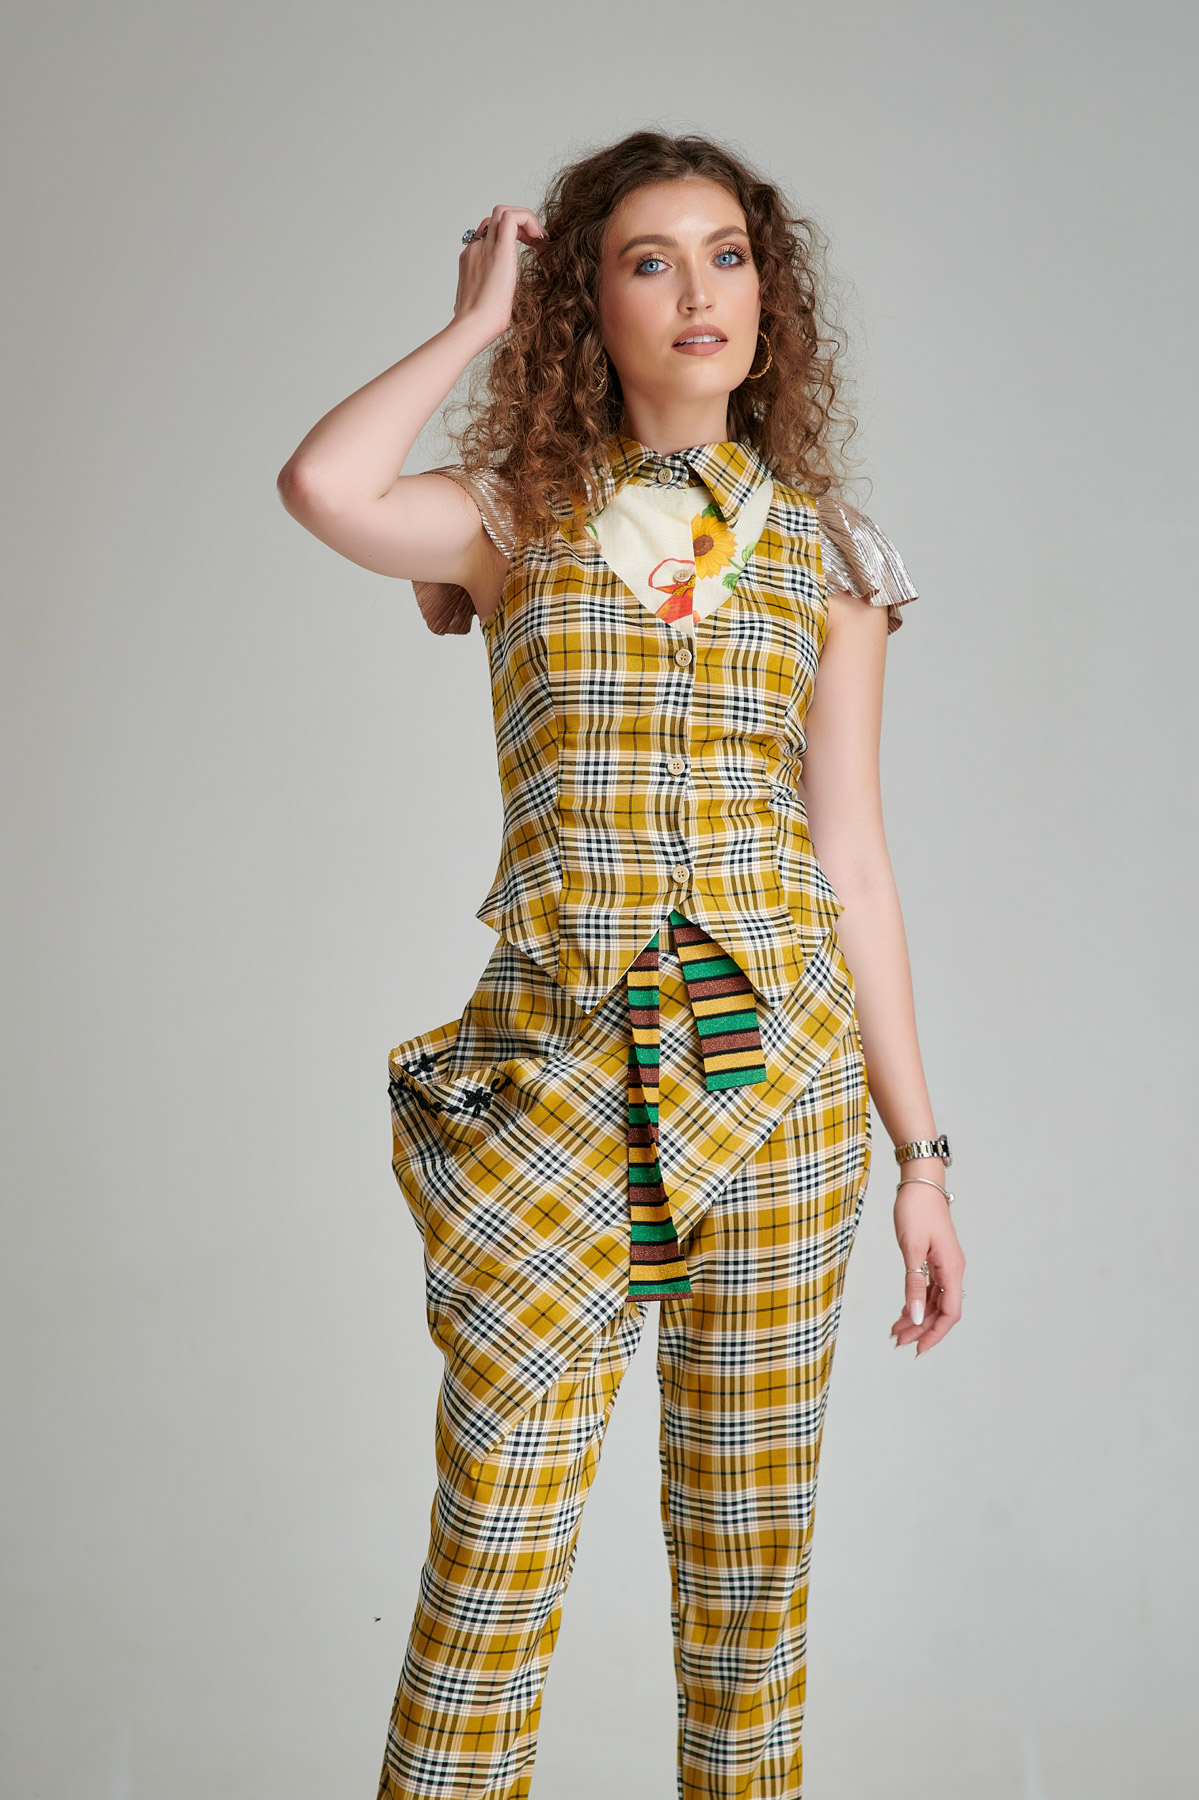 CINDY viscose vest with yellow checked print. Natural fabrics, original design, handmade embroidery